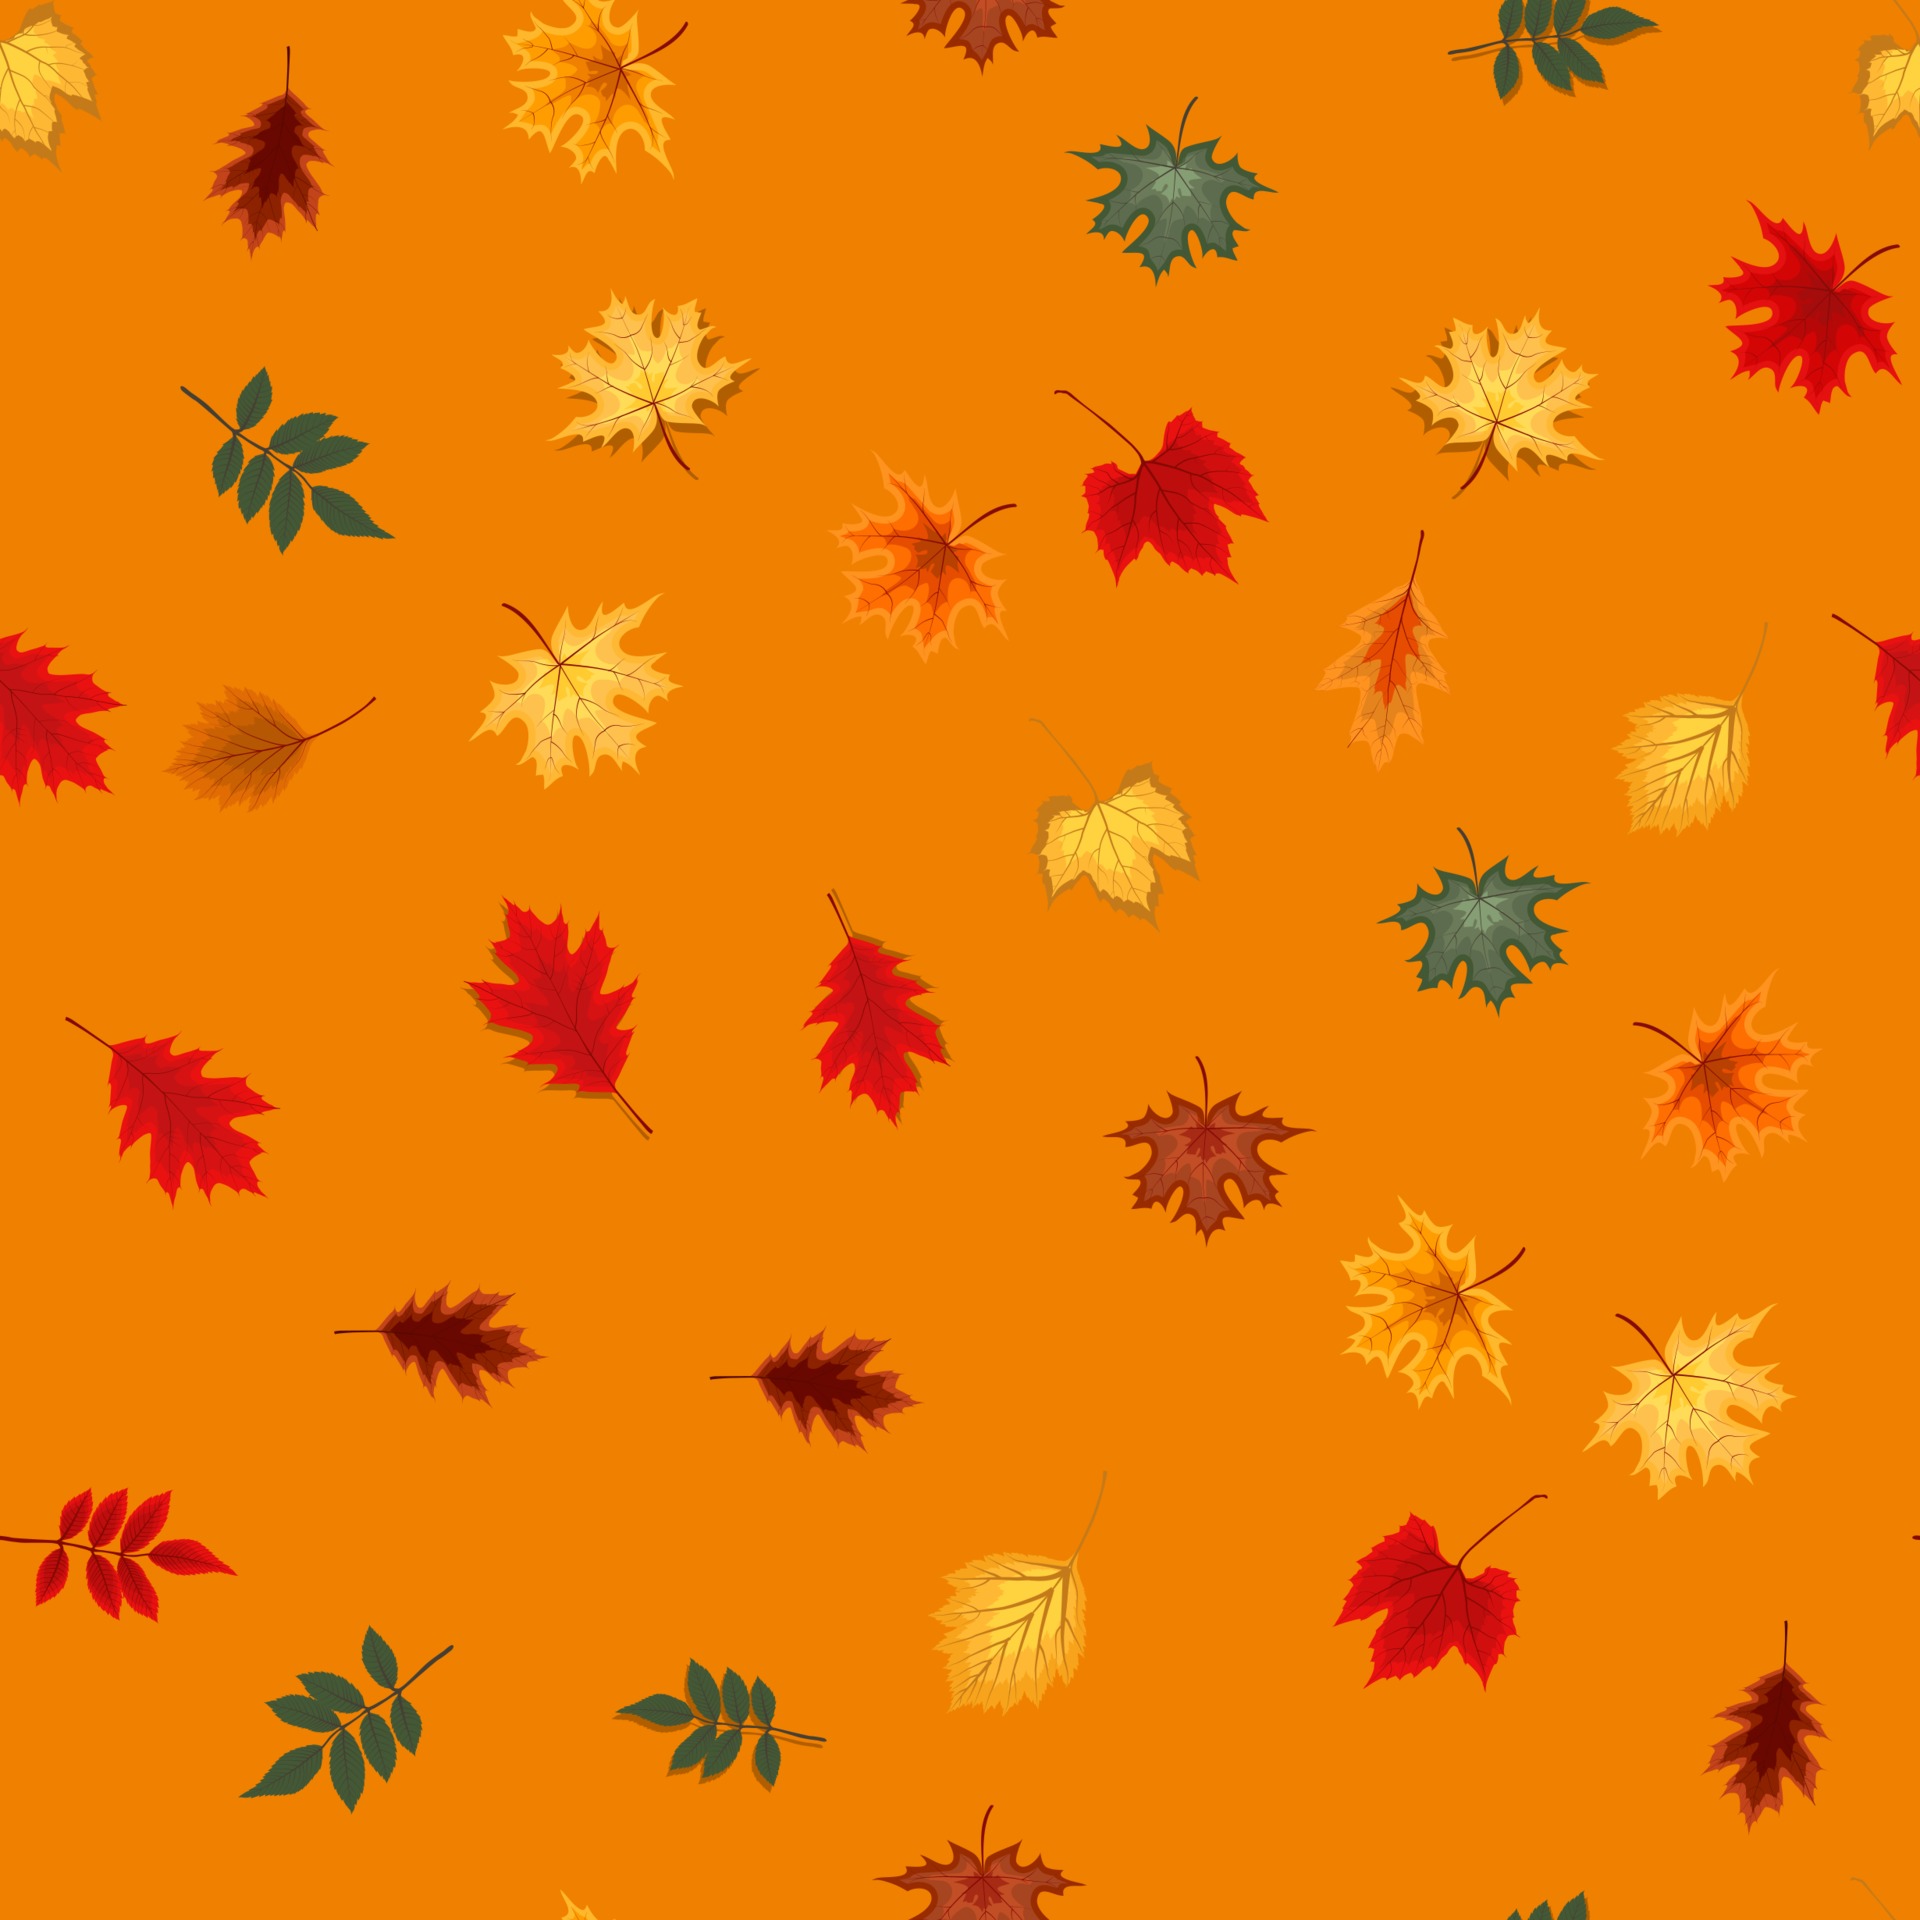 Autumn Seamless Pattern Background with Falling Autumn Leaves 3355614 ...